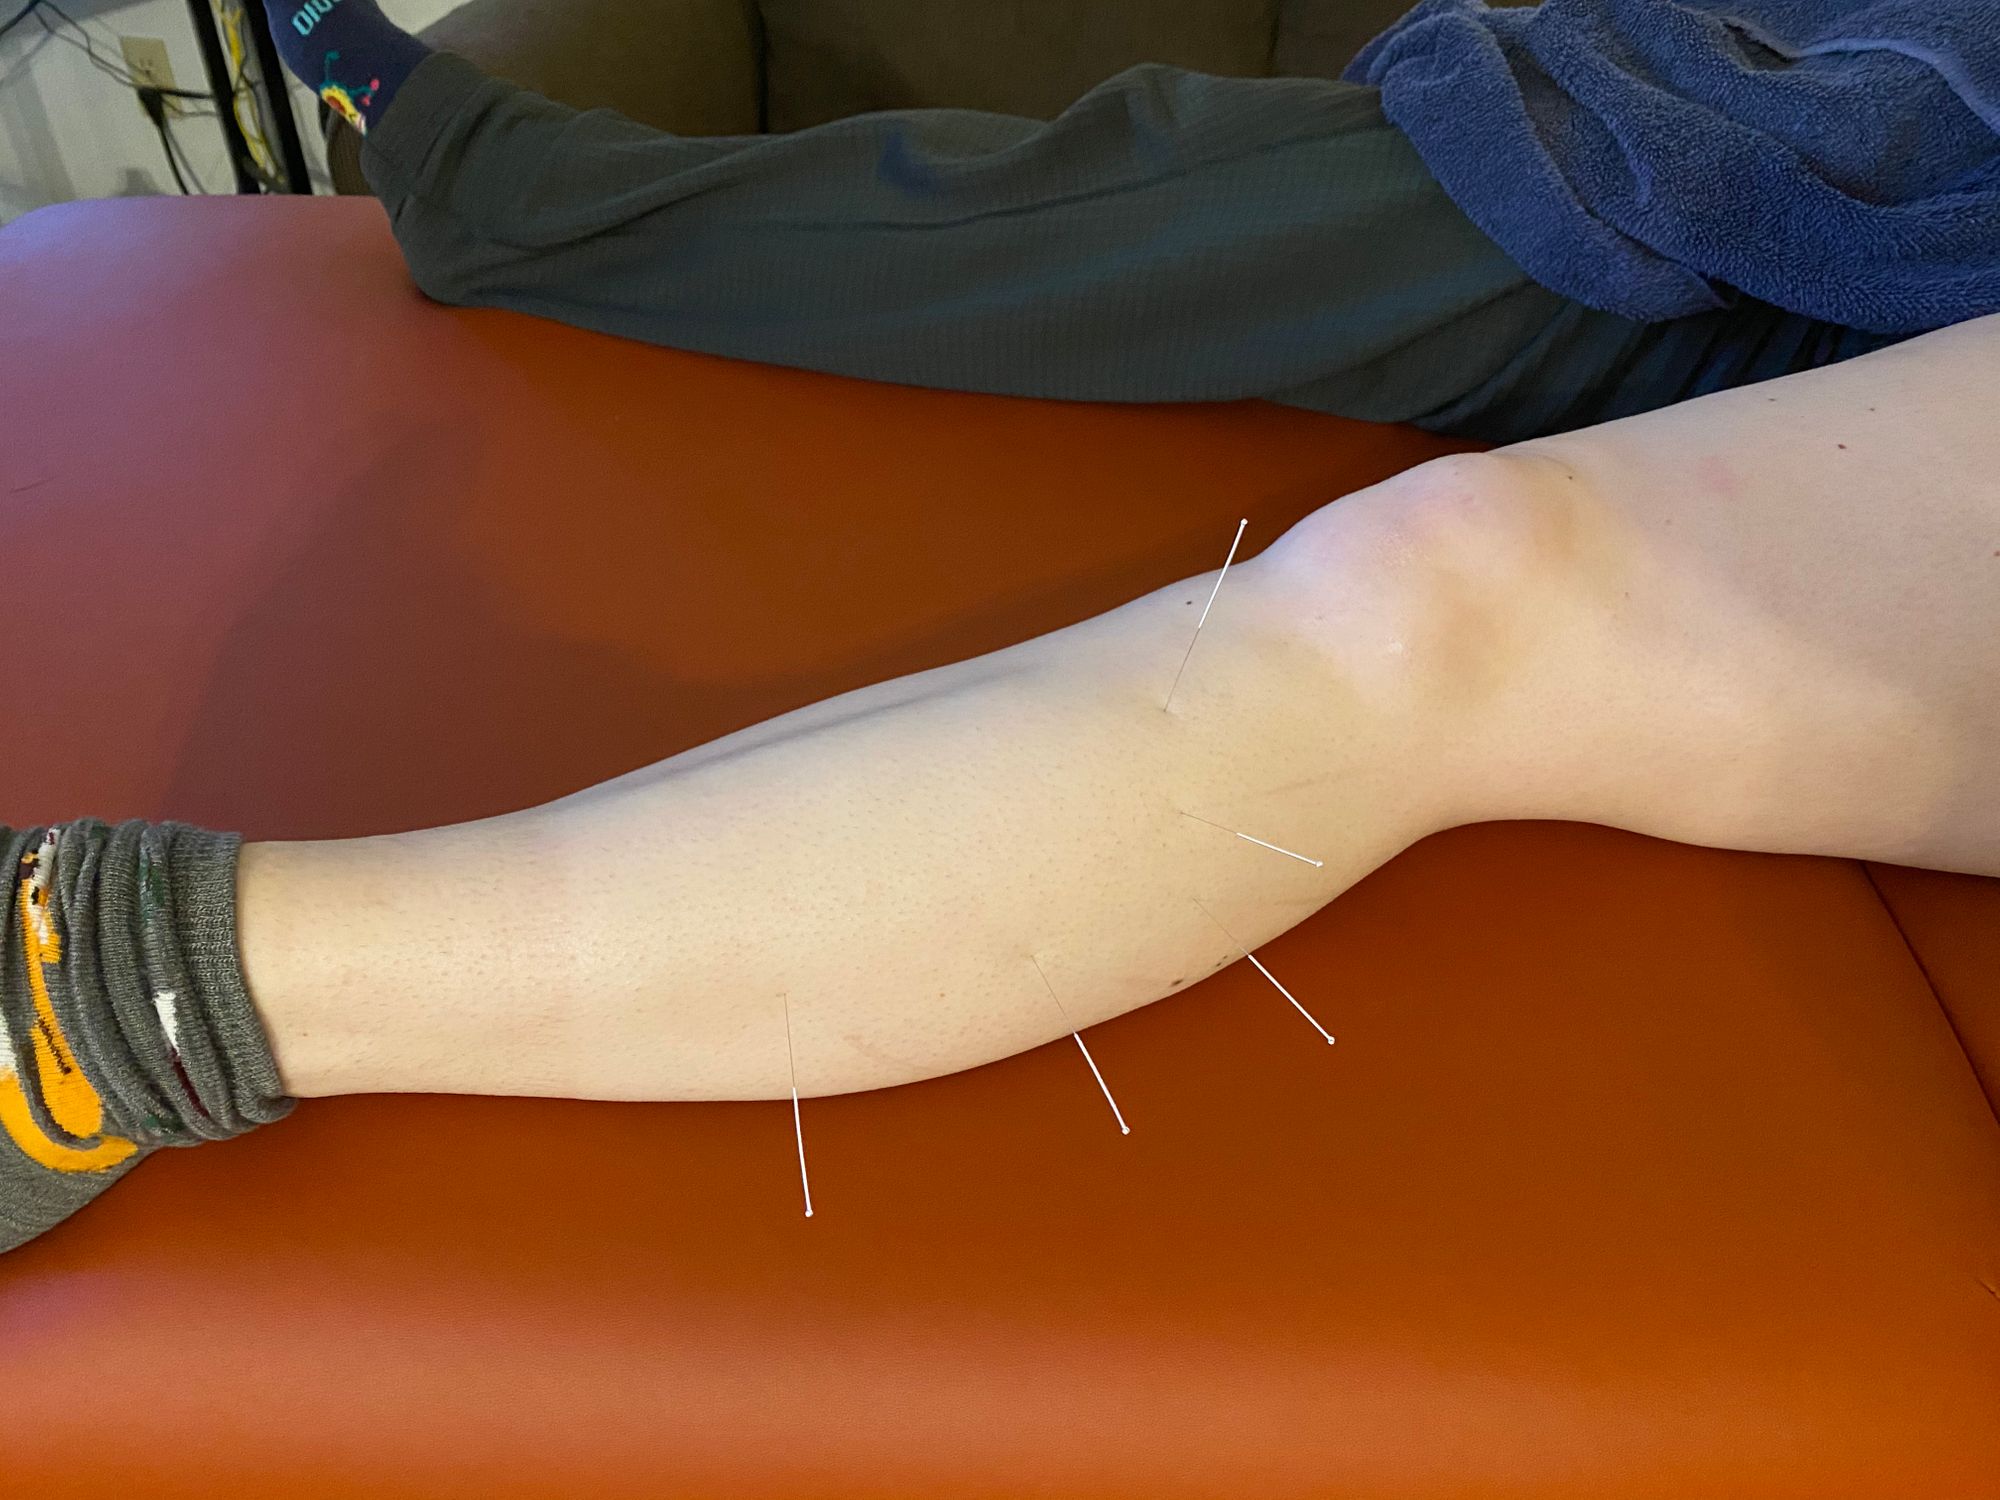 Dry needling with electrical stimulation side effects